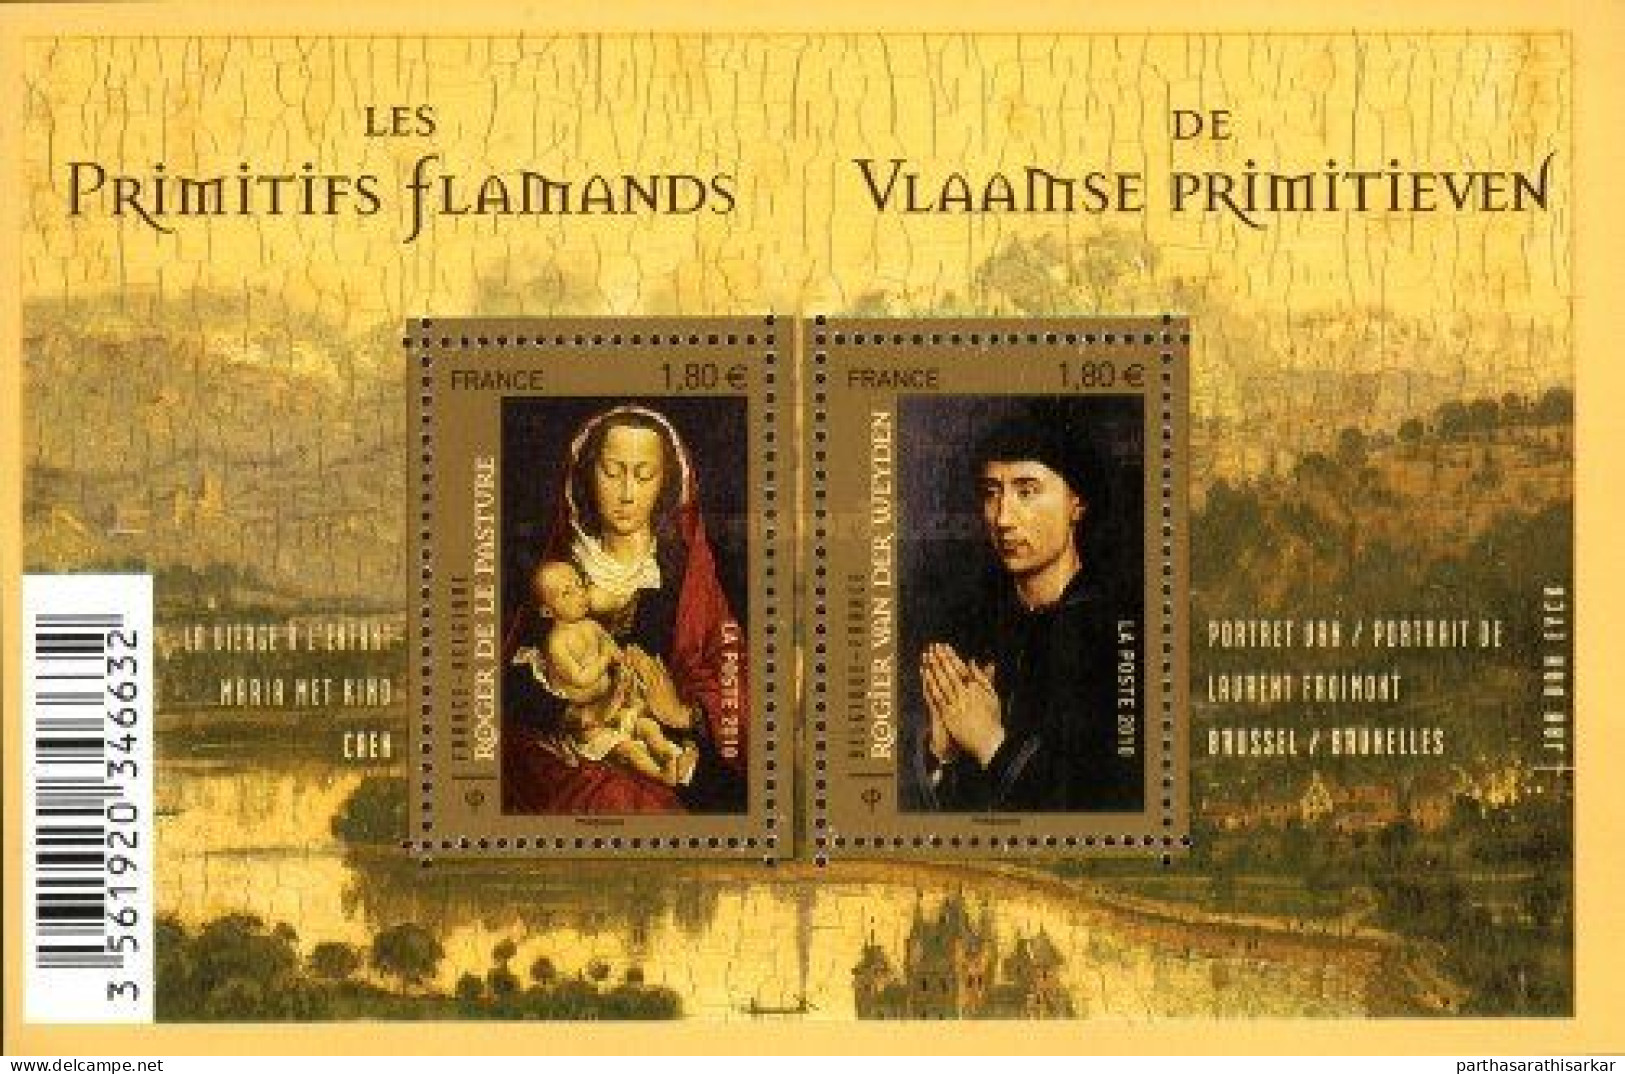 FRANCE 2010 JOINT ISSUE WITH BELGIUM EARLY NETHERLANDISH PAINTINGS MINIATURE SHEET MS MNH - Emisiones Comunes